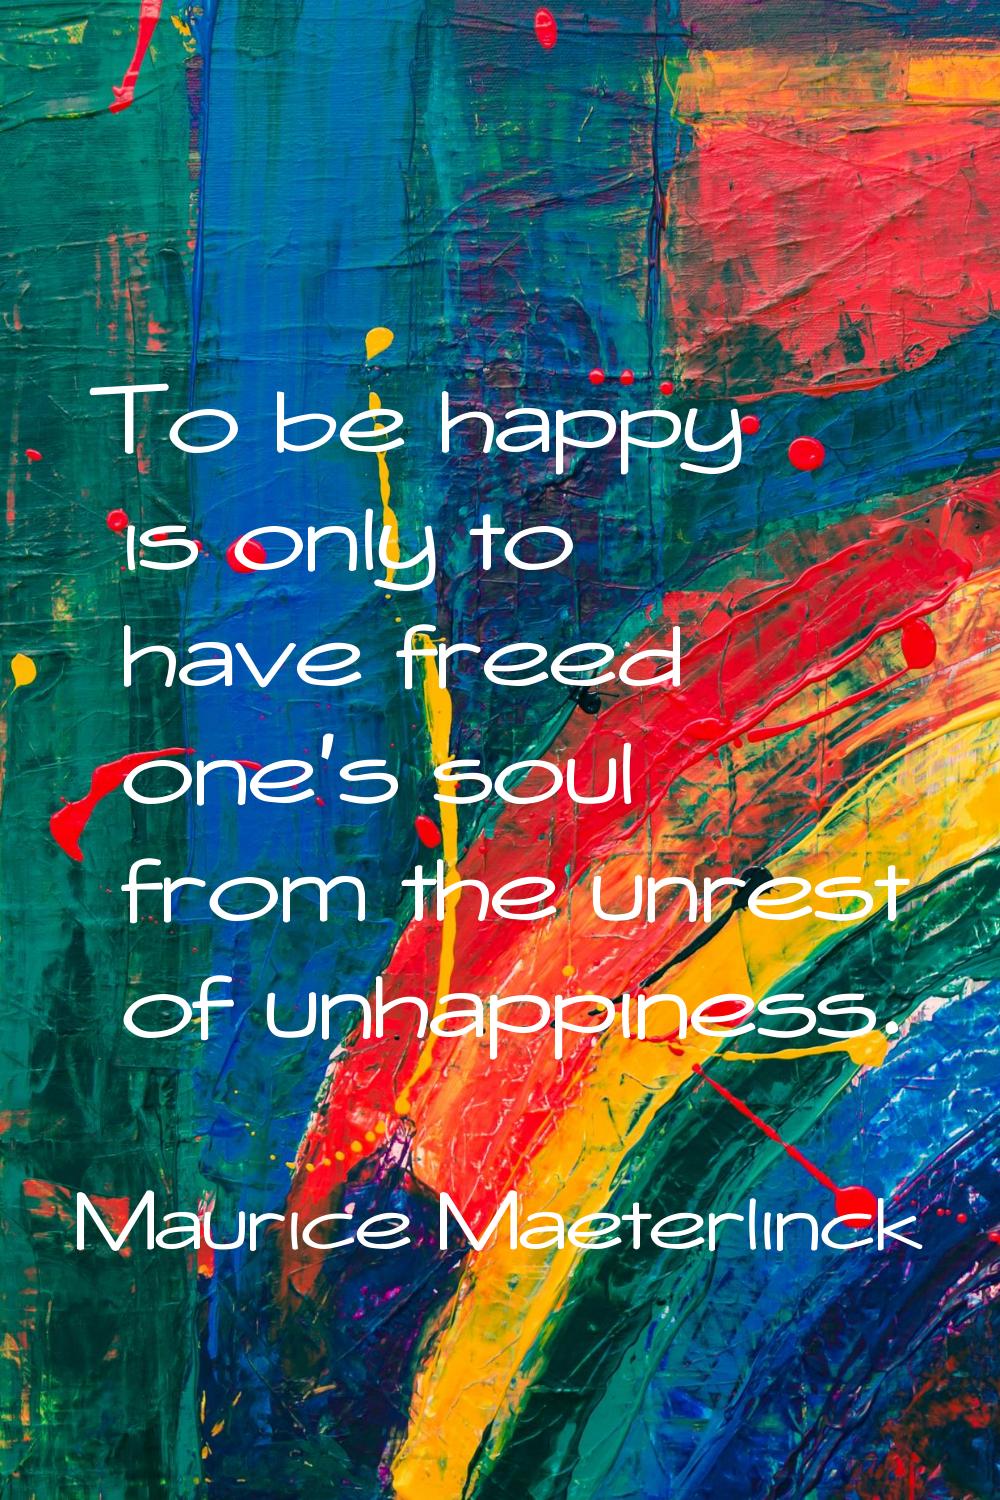 To be happy is only to have freed one's soul from the unrest of unhappiness.